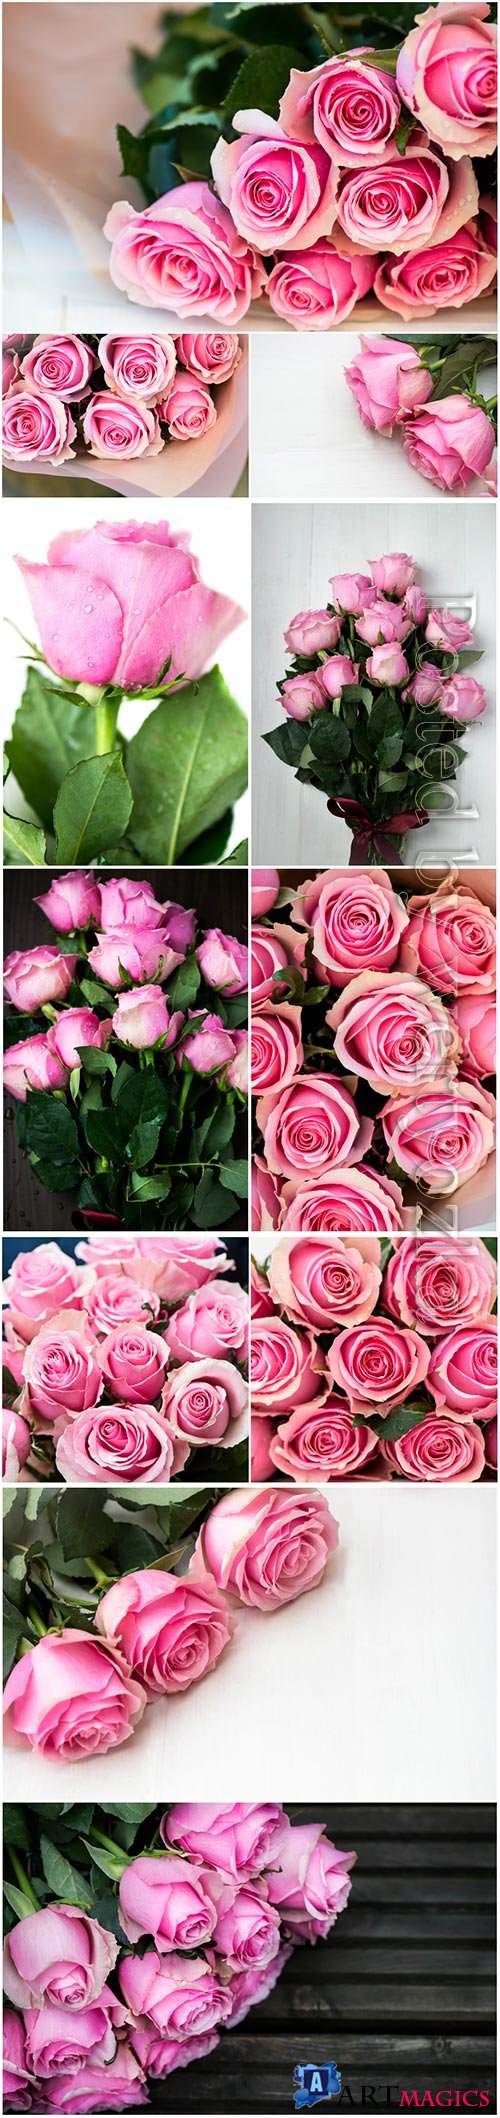 Bouquets of pink roses beautiful stock photo